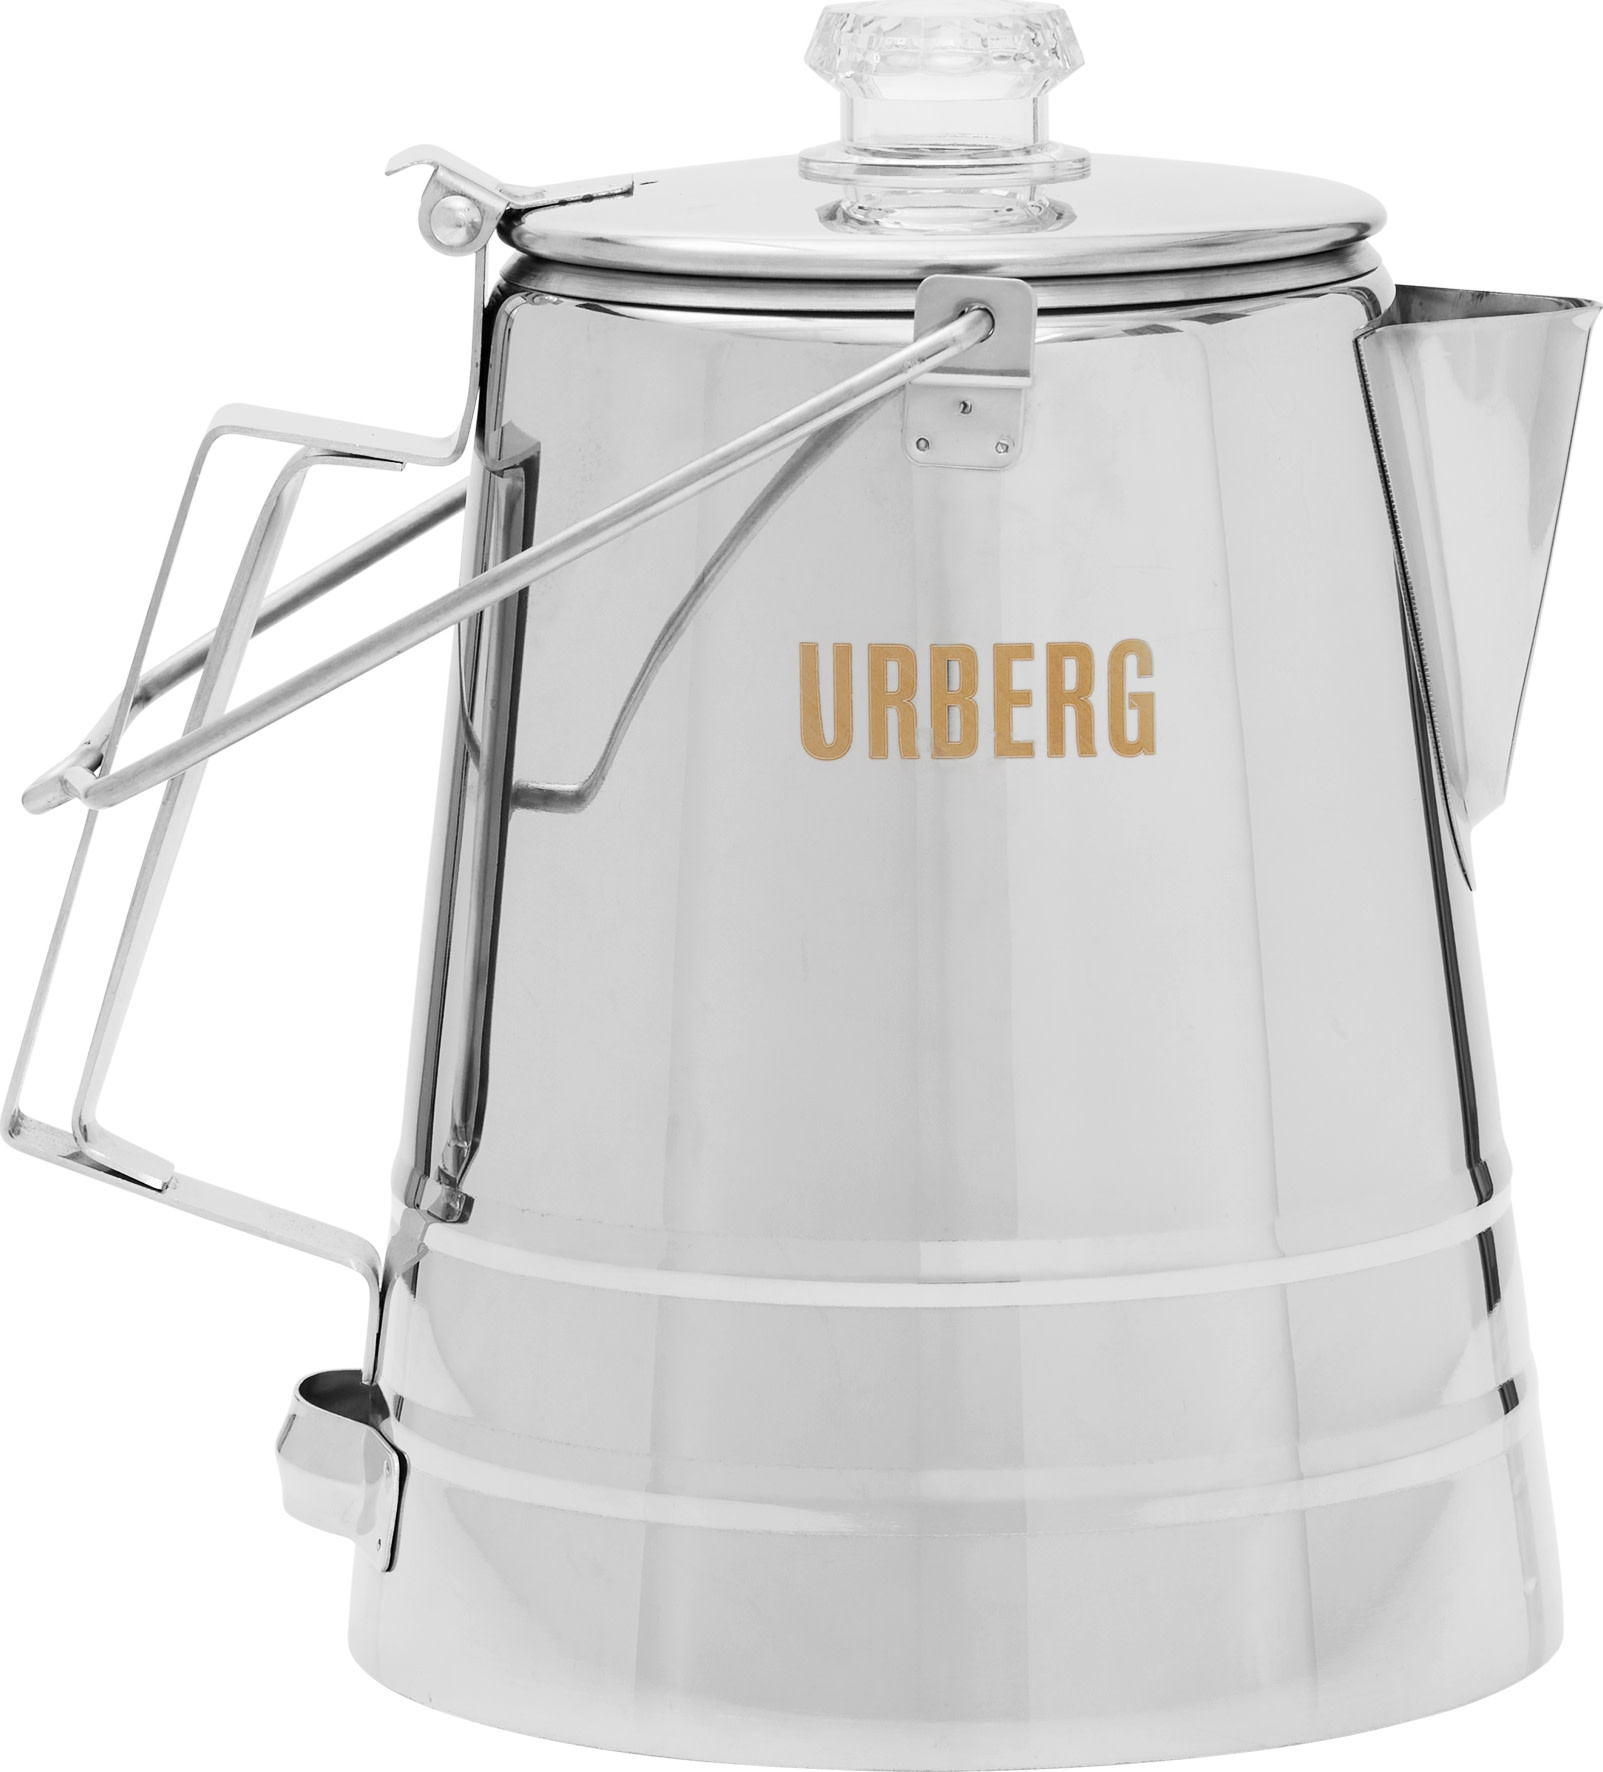 Urberg Urberg Rogen Percolator 14 cups Stainless One Size, Stainless